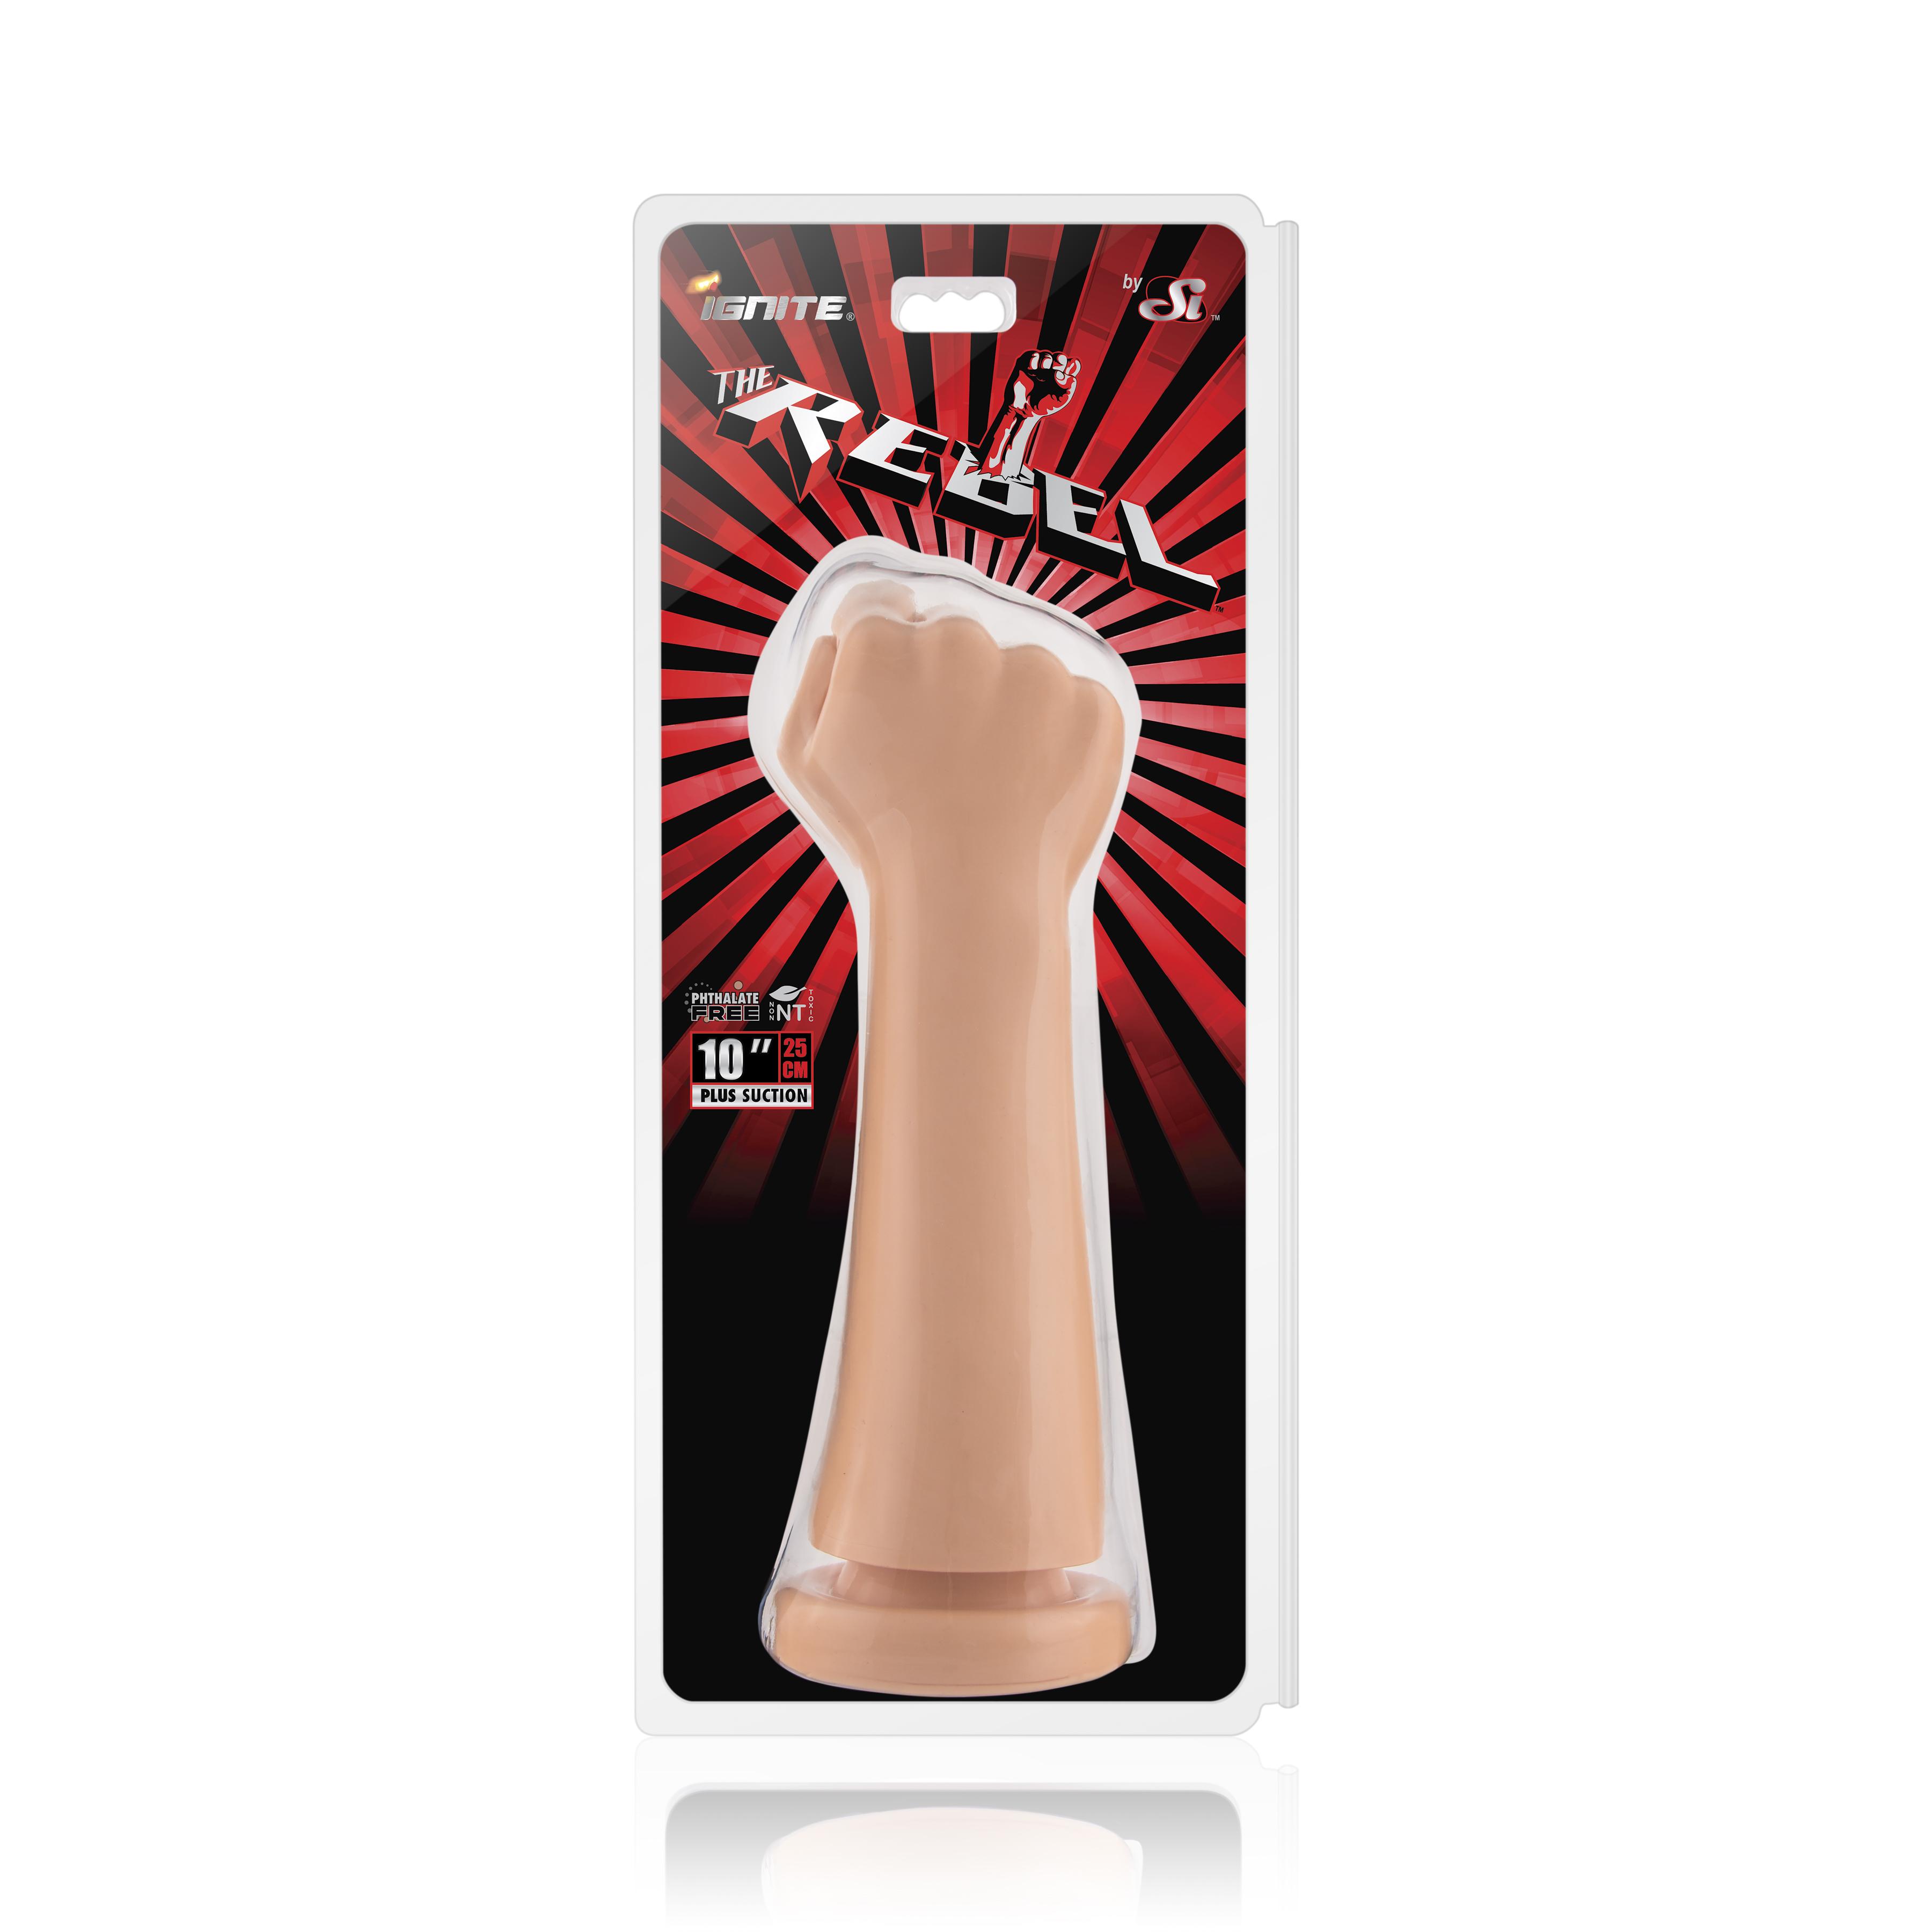 SI IGNITE The Rebel with suction, 25cm, Flesh